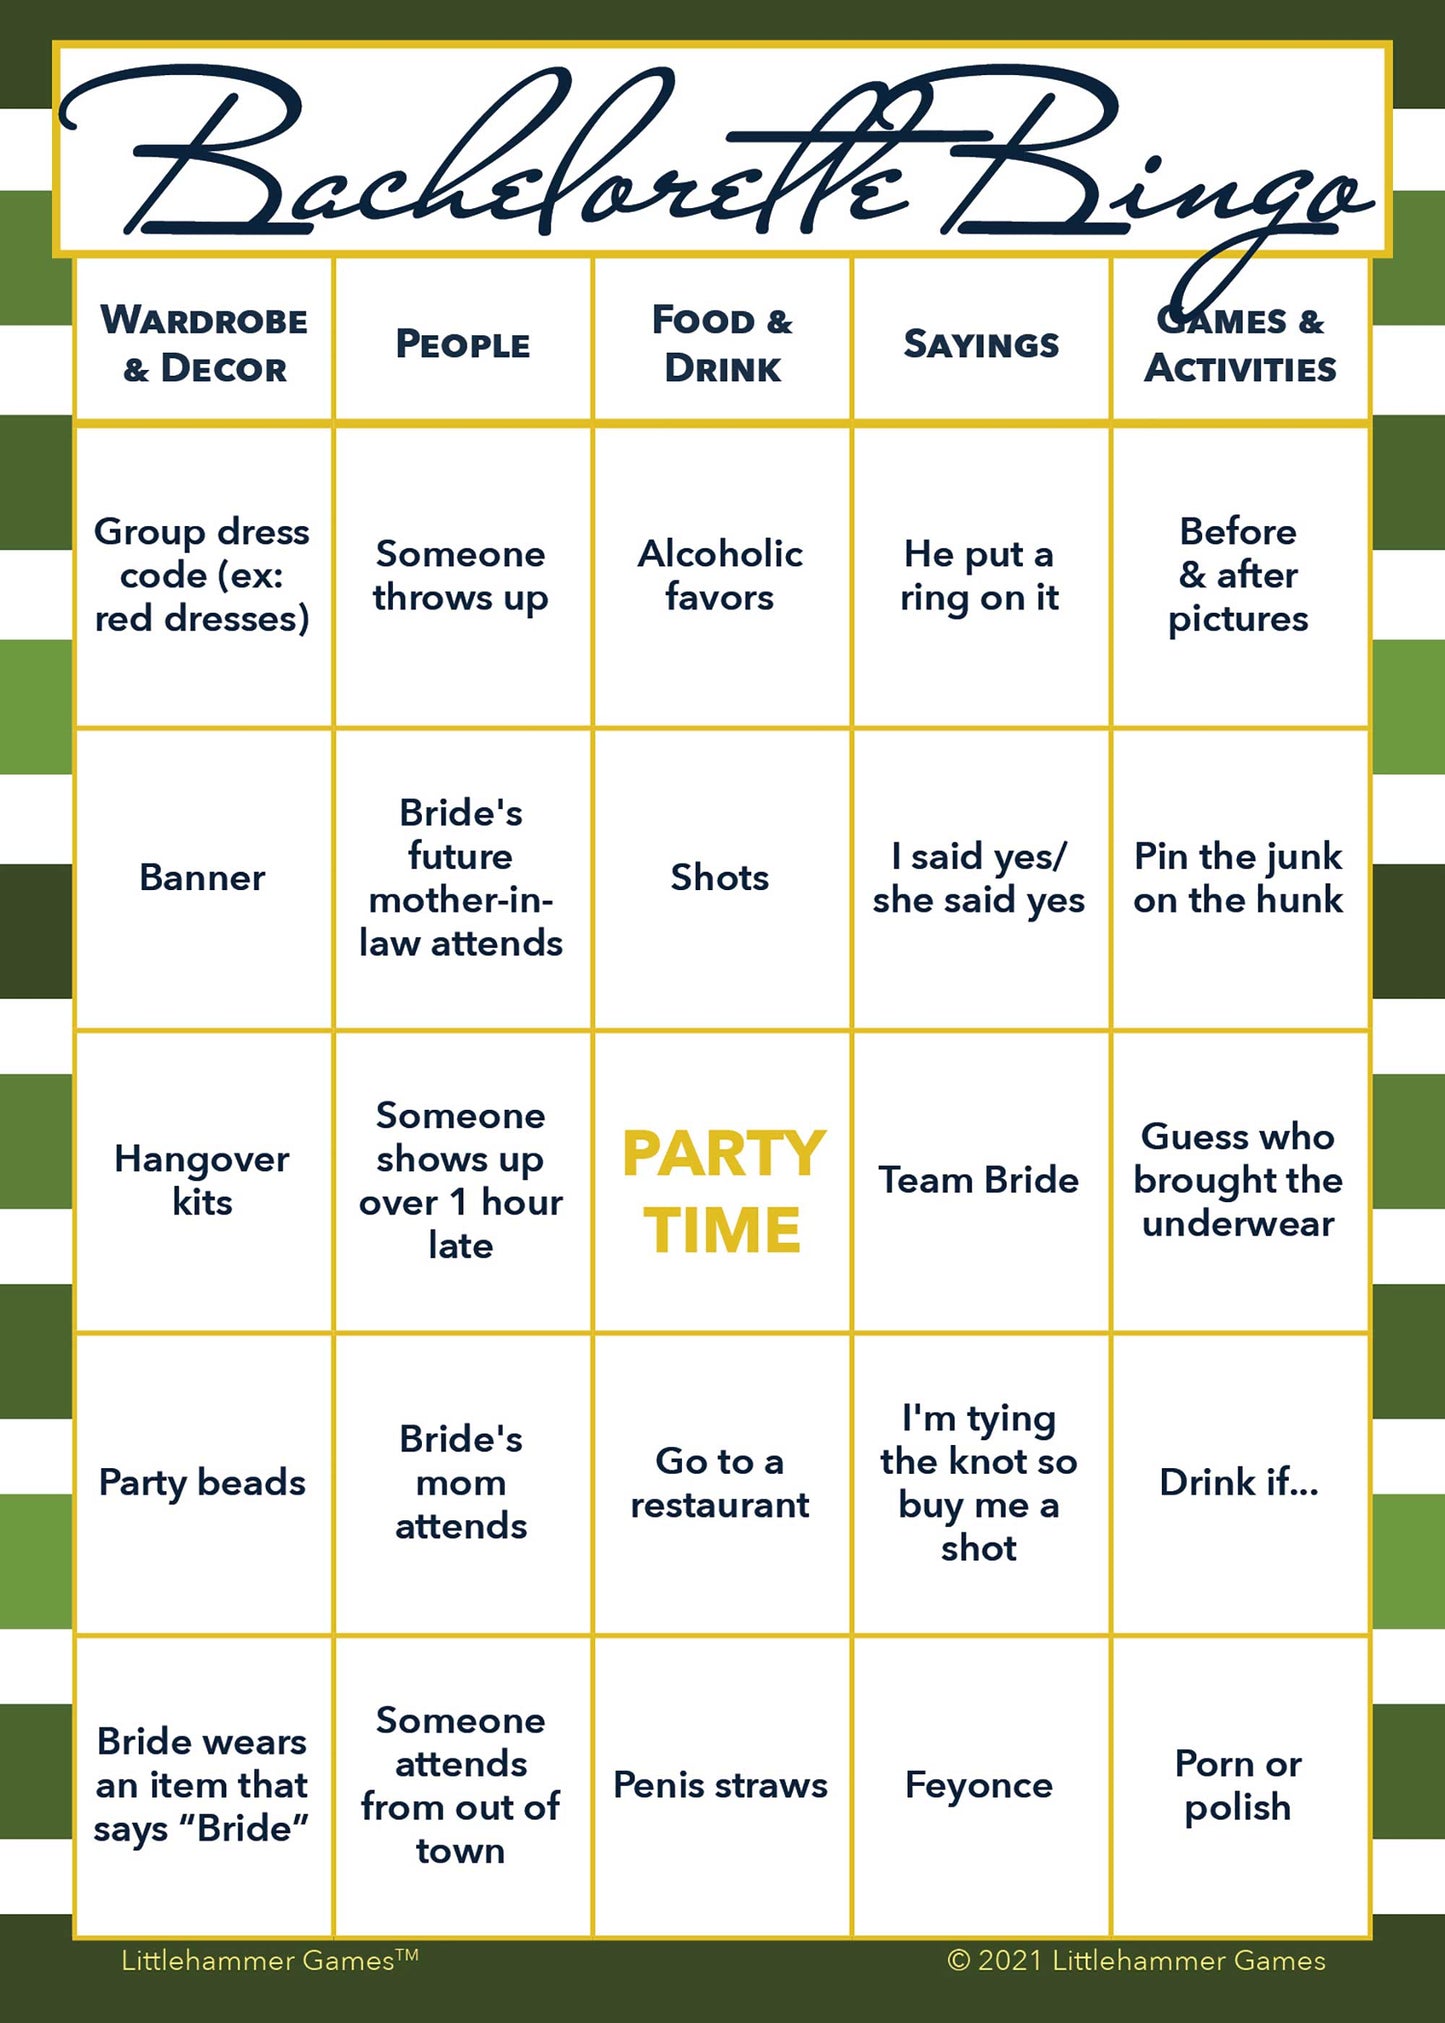 Bachelorette Bingo game card with a green-striped background